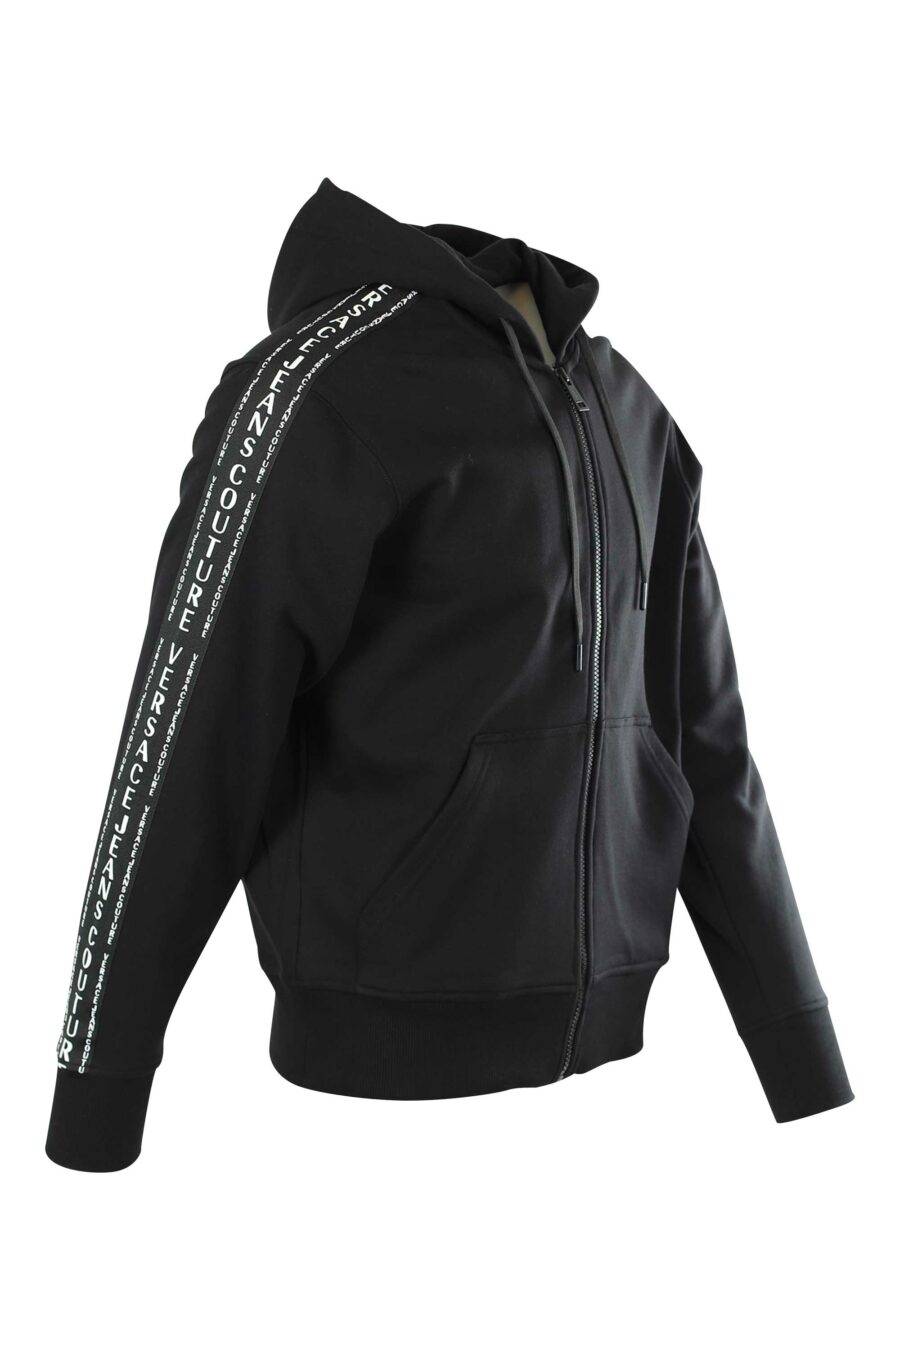 Black hoodie with zip and logo - 8052019321692 2